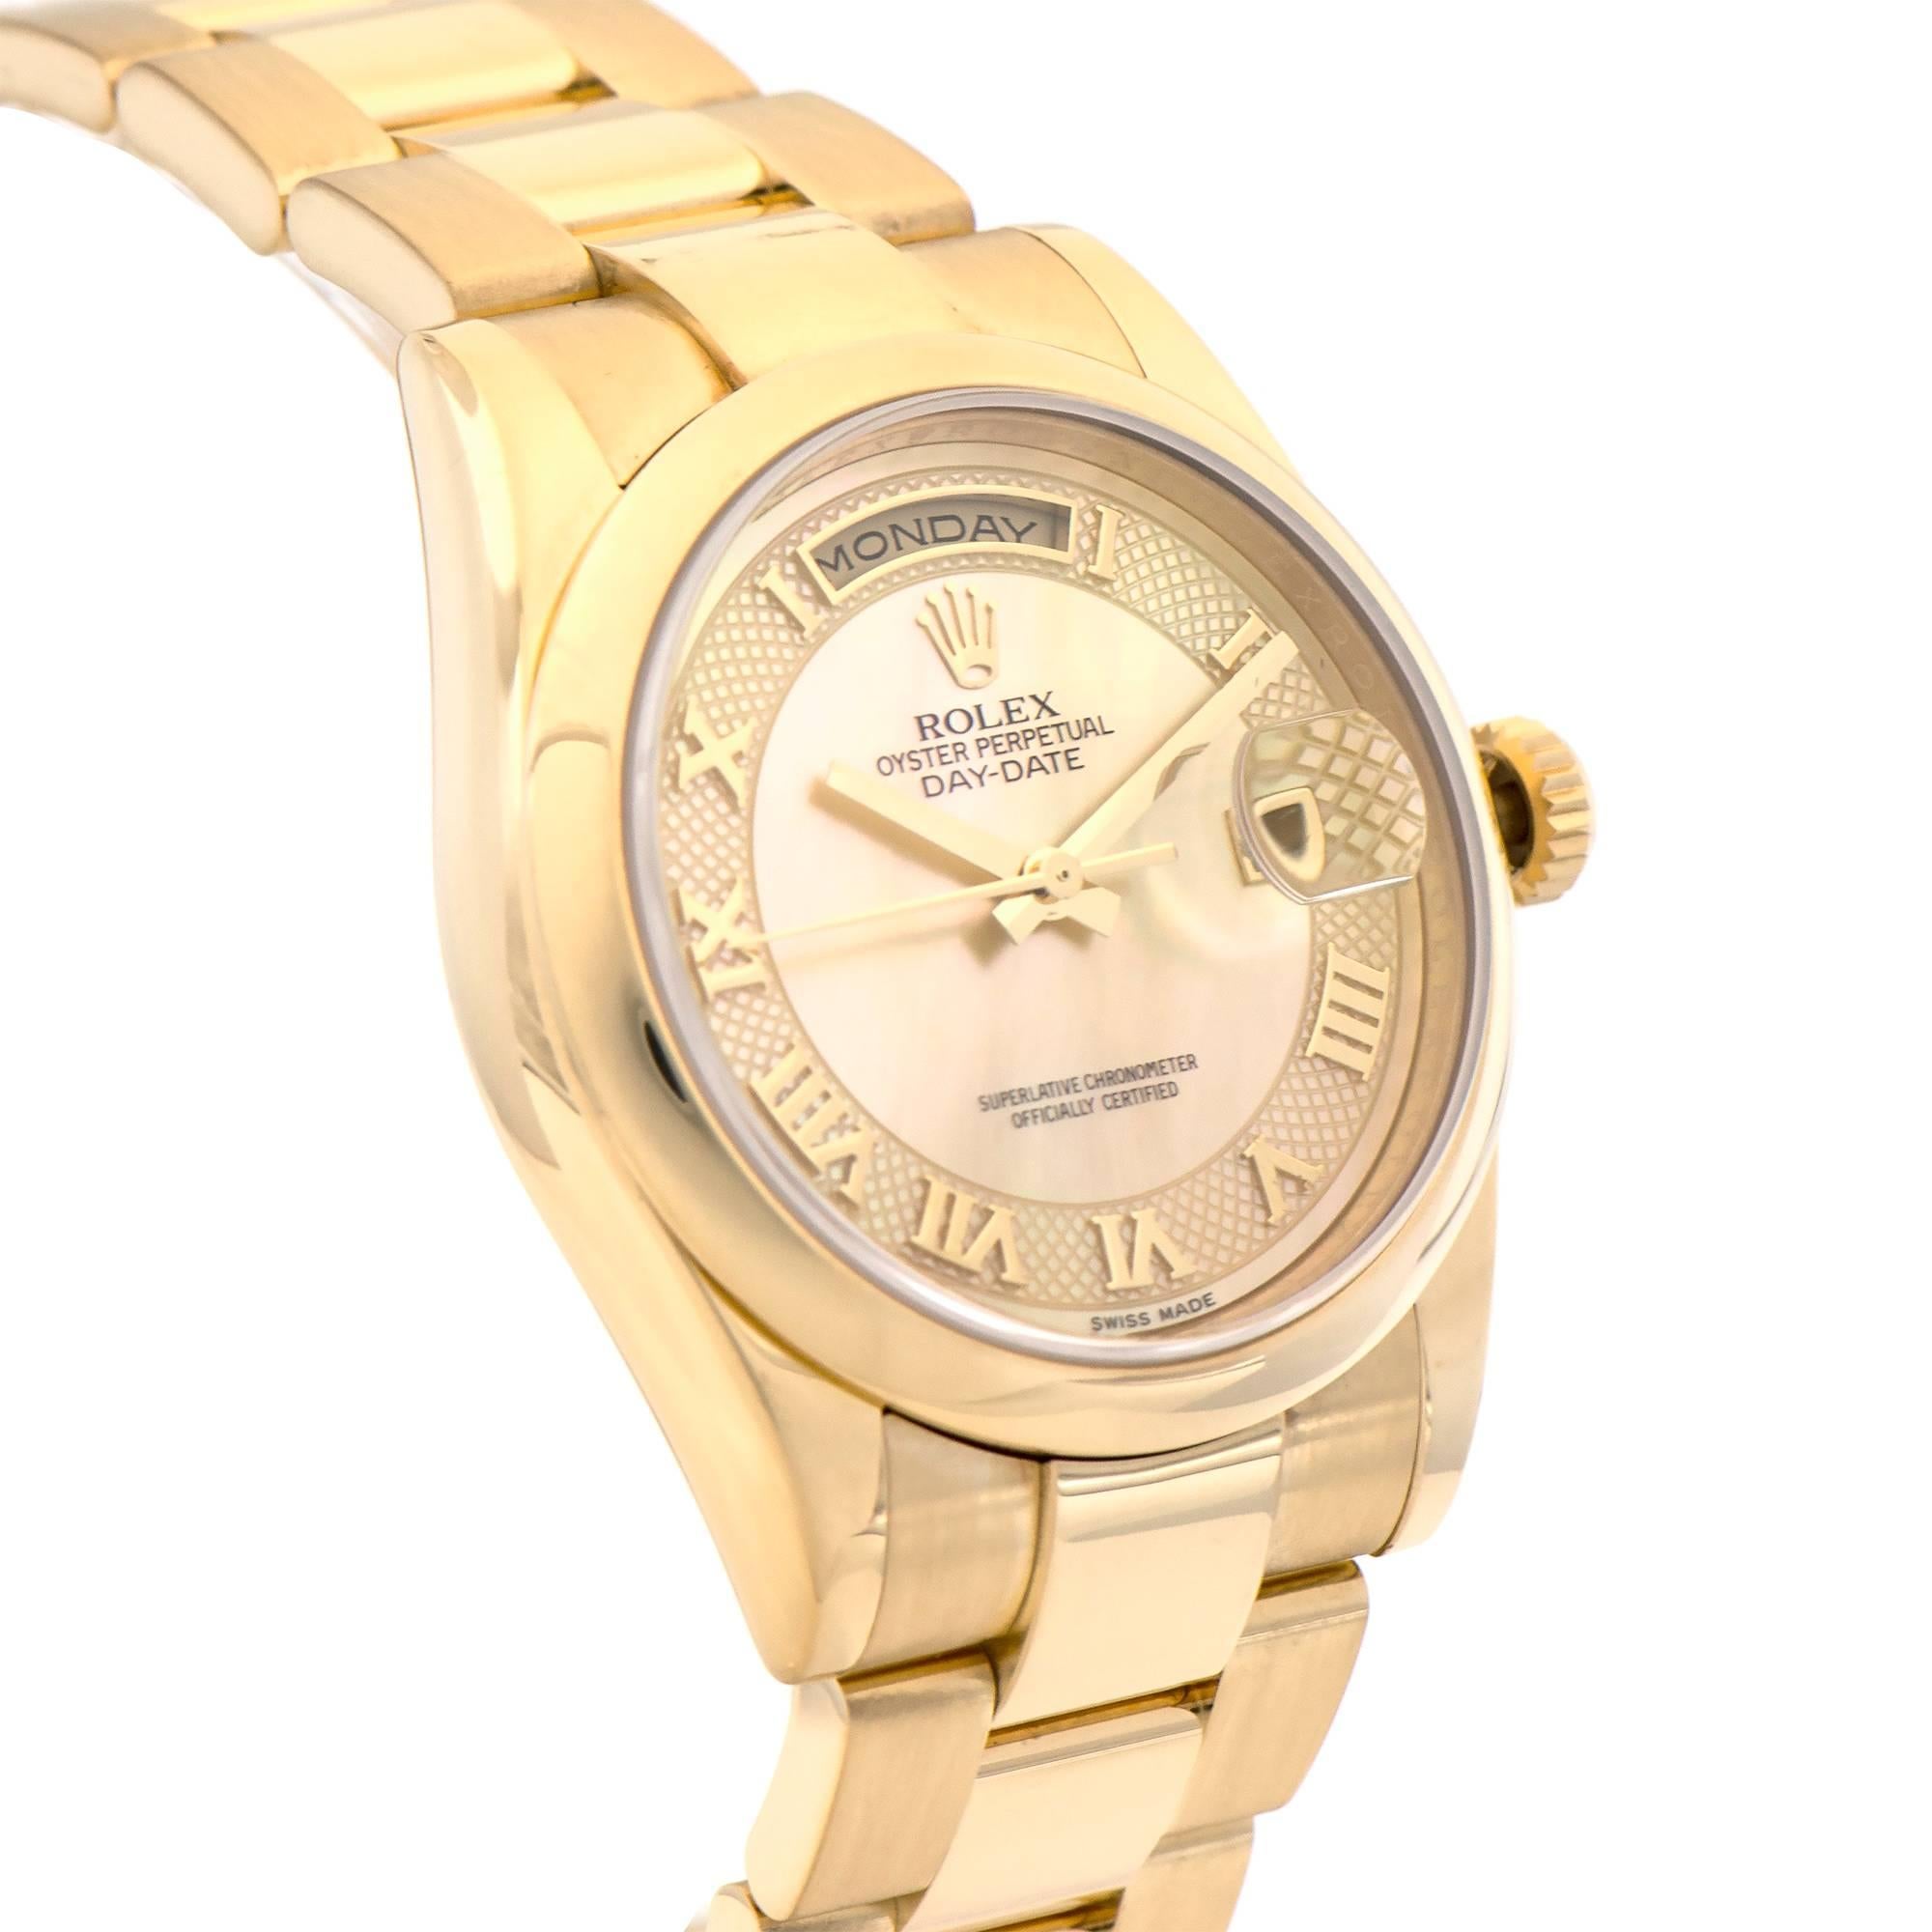 Rolex Day-Date President ref 118208 champagne mother of pearl deco roman dial with day and date functions. 

Mother of pearl dial
36mm 18k yellow gold case
Bezel Rolex domed 18k yellow gold
Rolex 73208 18k yellow gold oyster band
Rolex 3155 31 jewel